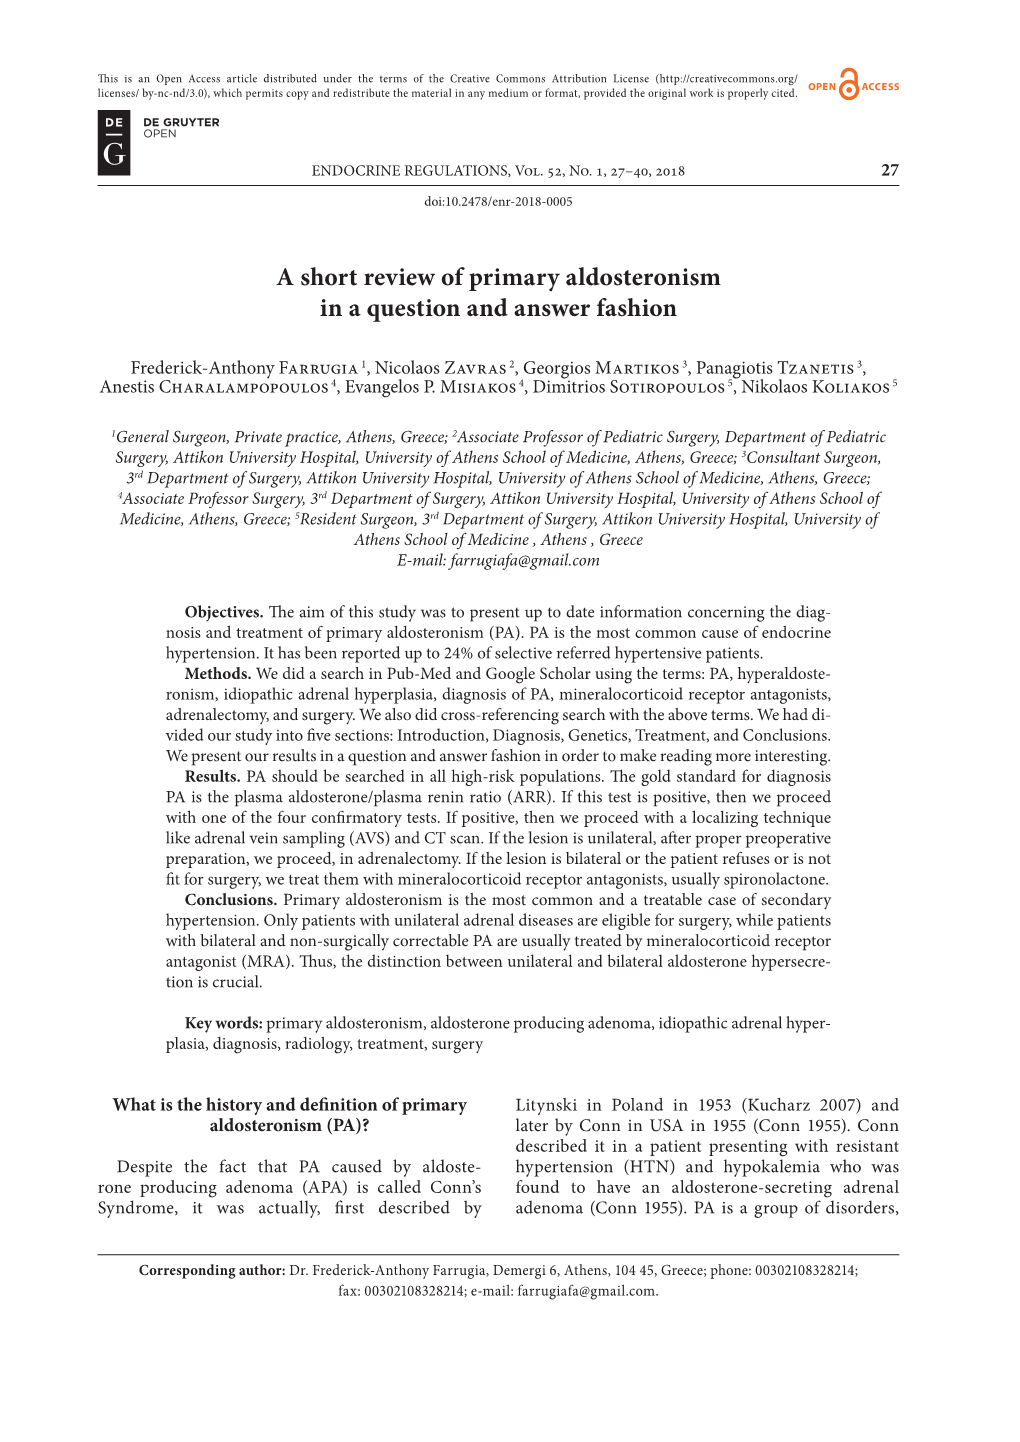 A Short Review of Primary Aldosteronism in a Question and Answer Fashion